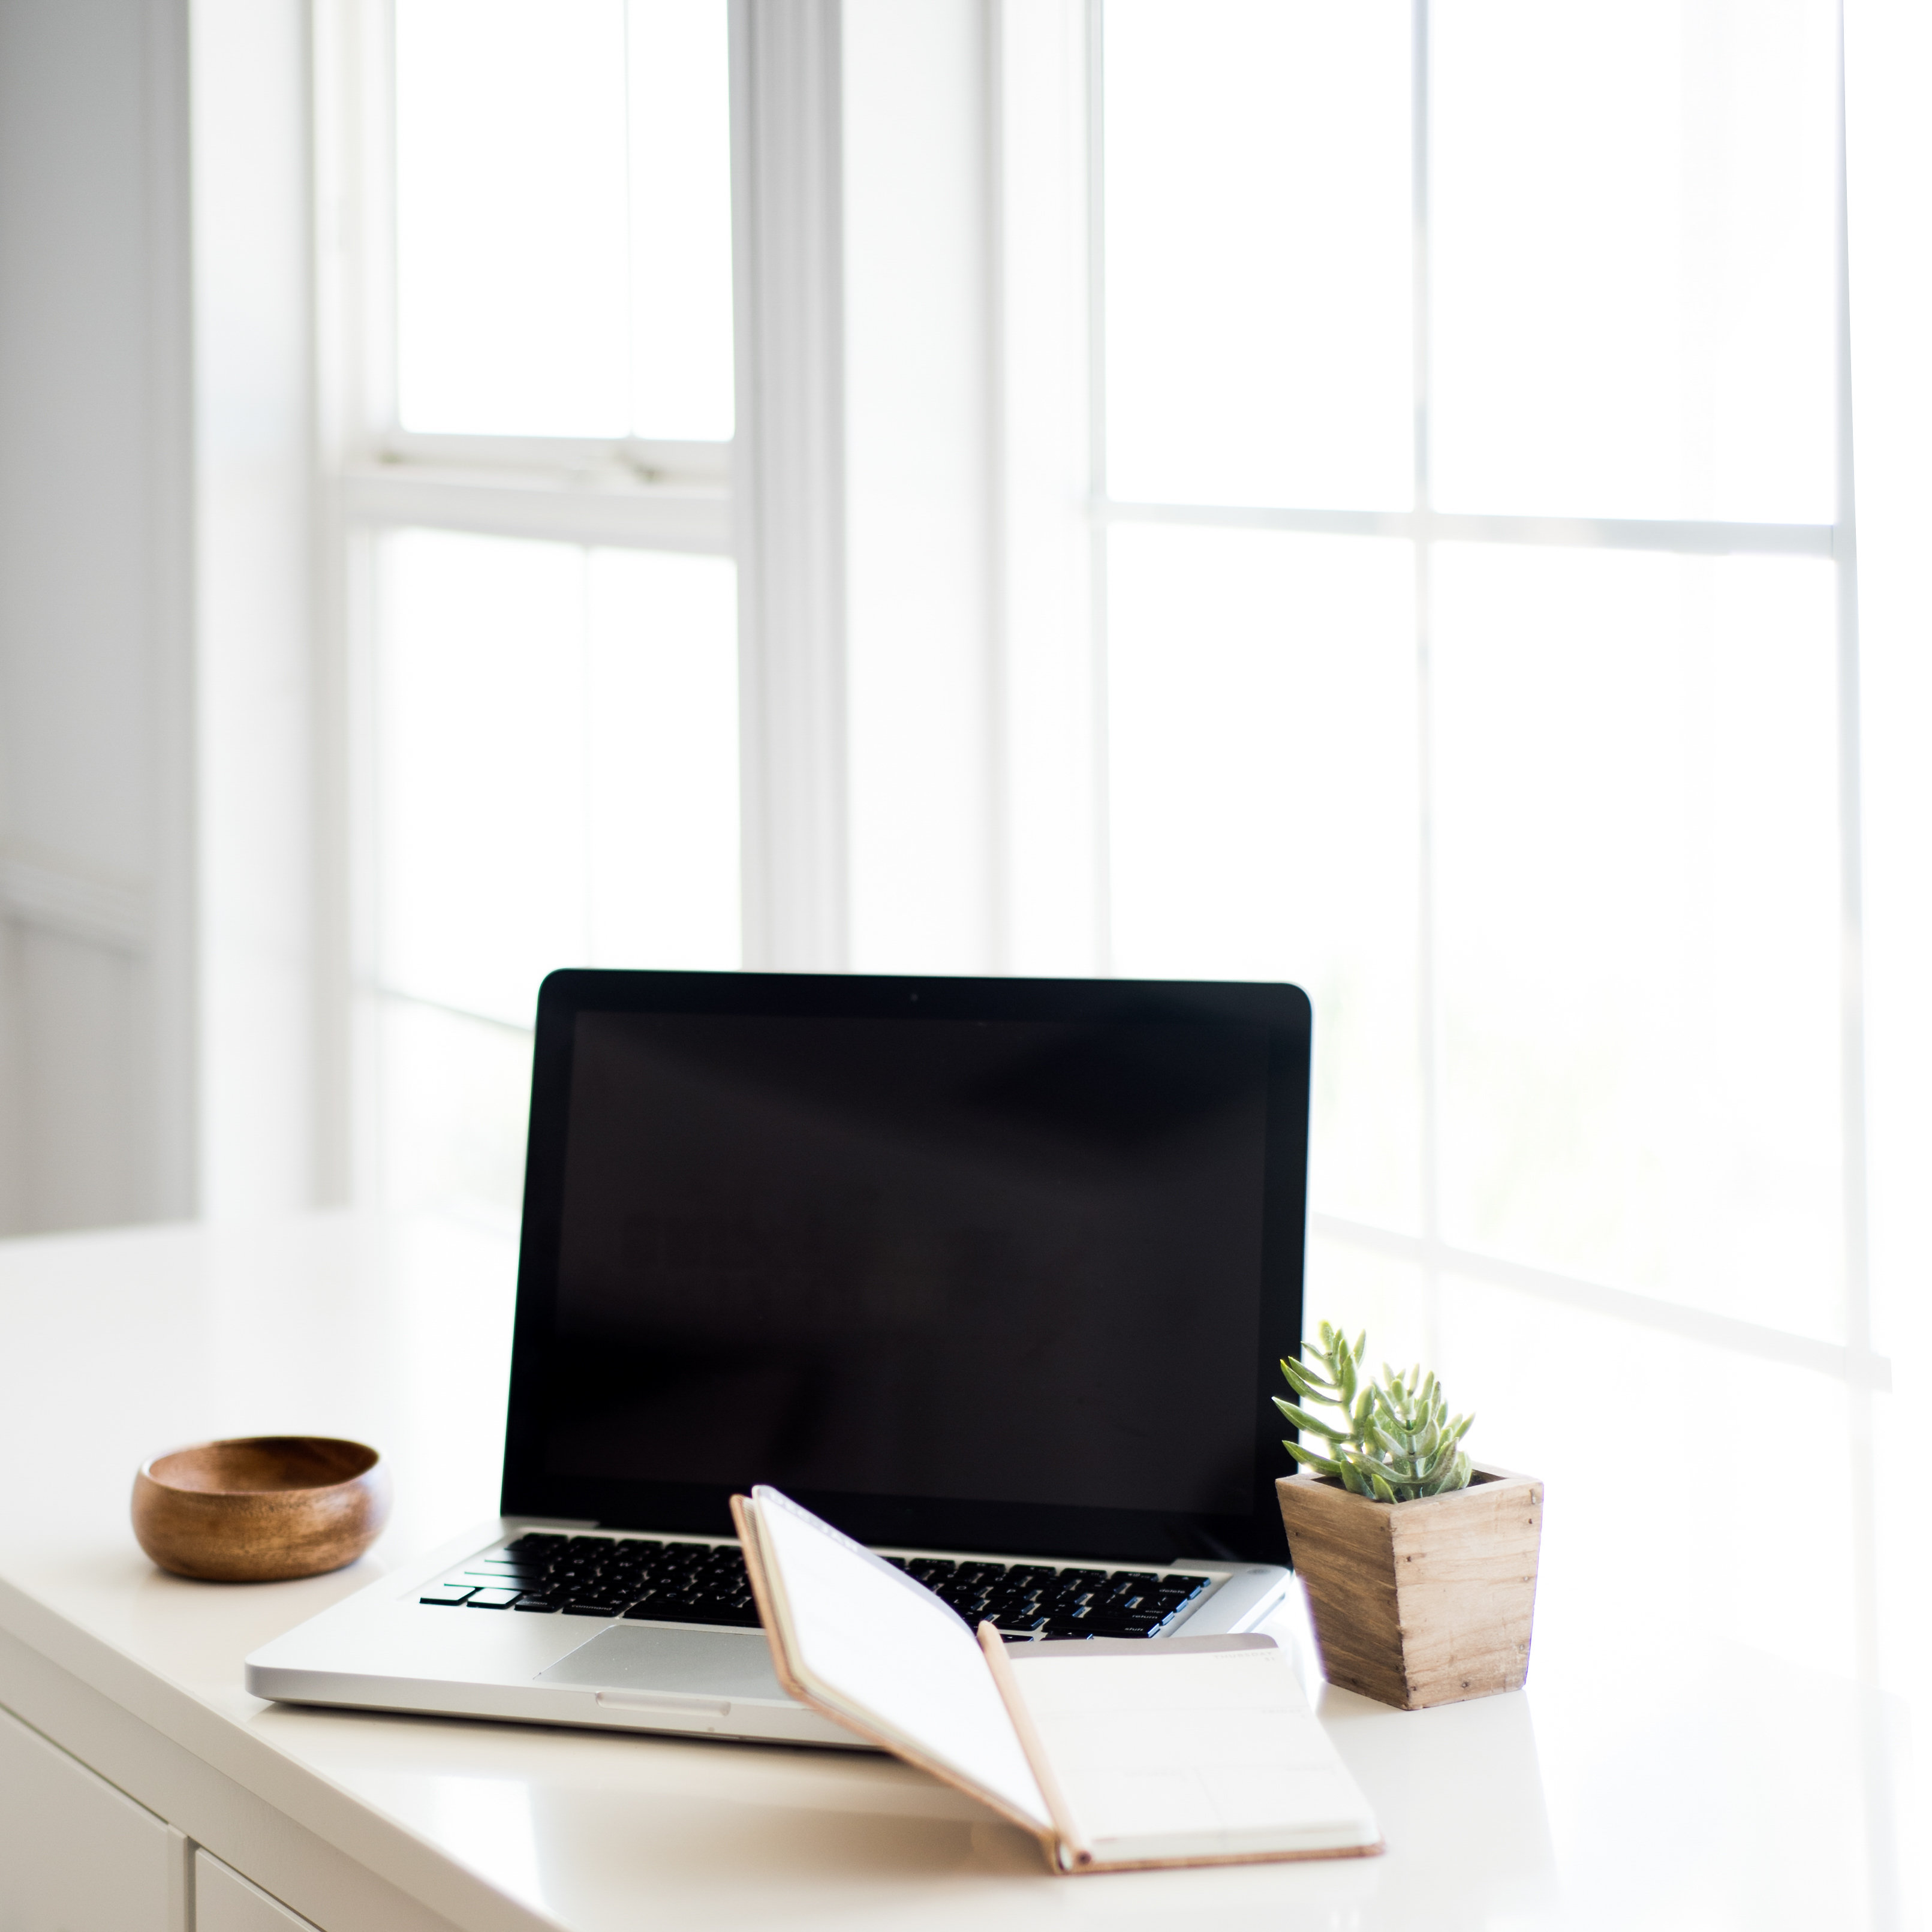 6 Eco-Friendly Office Must Haves